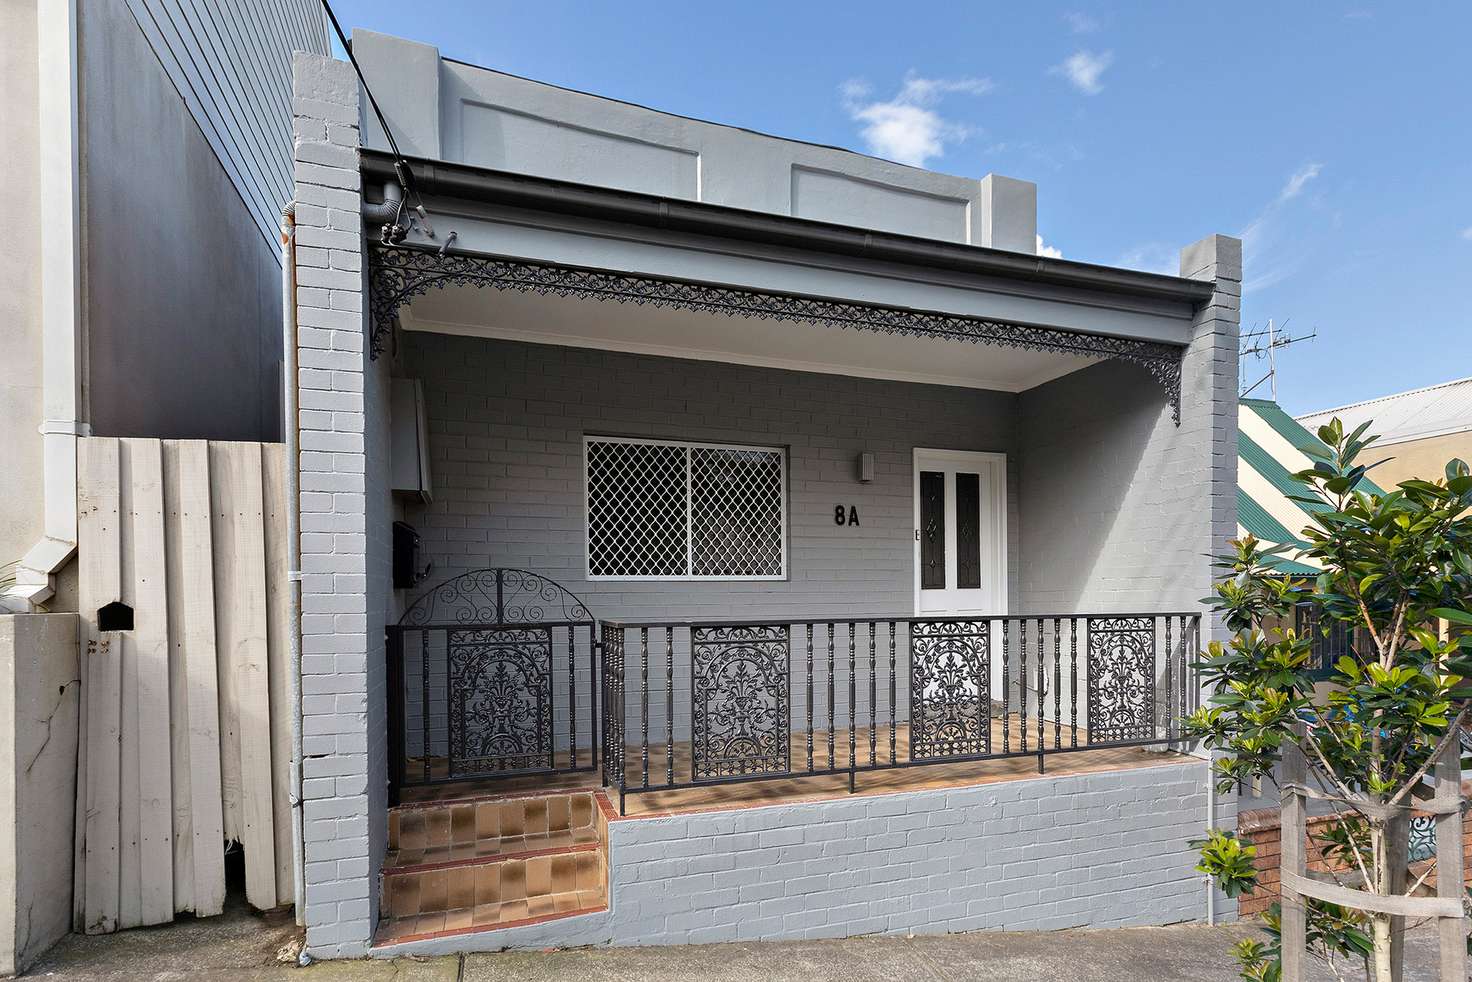 Main view of Homely house listing, 8A Denison Street, Rozelle NSW 2039